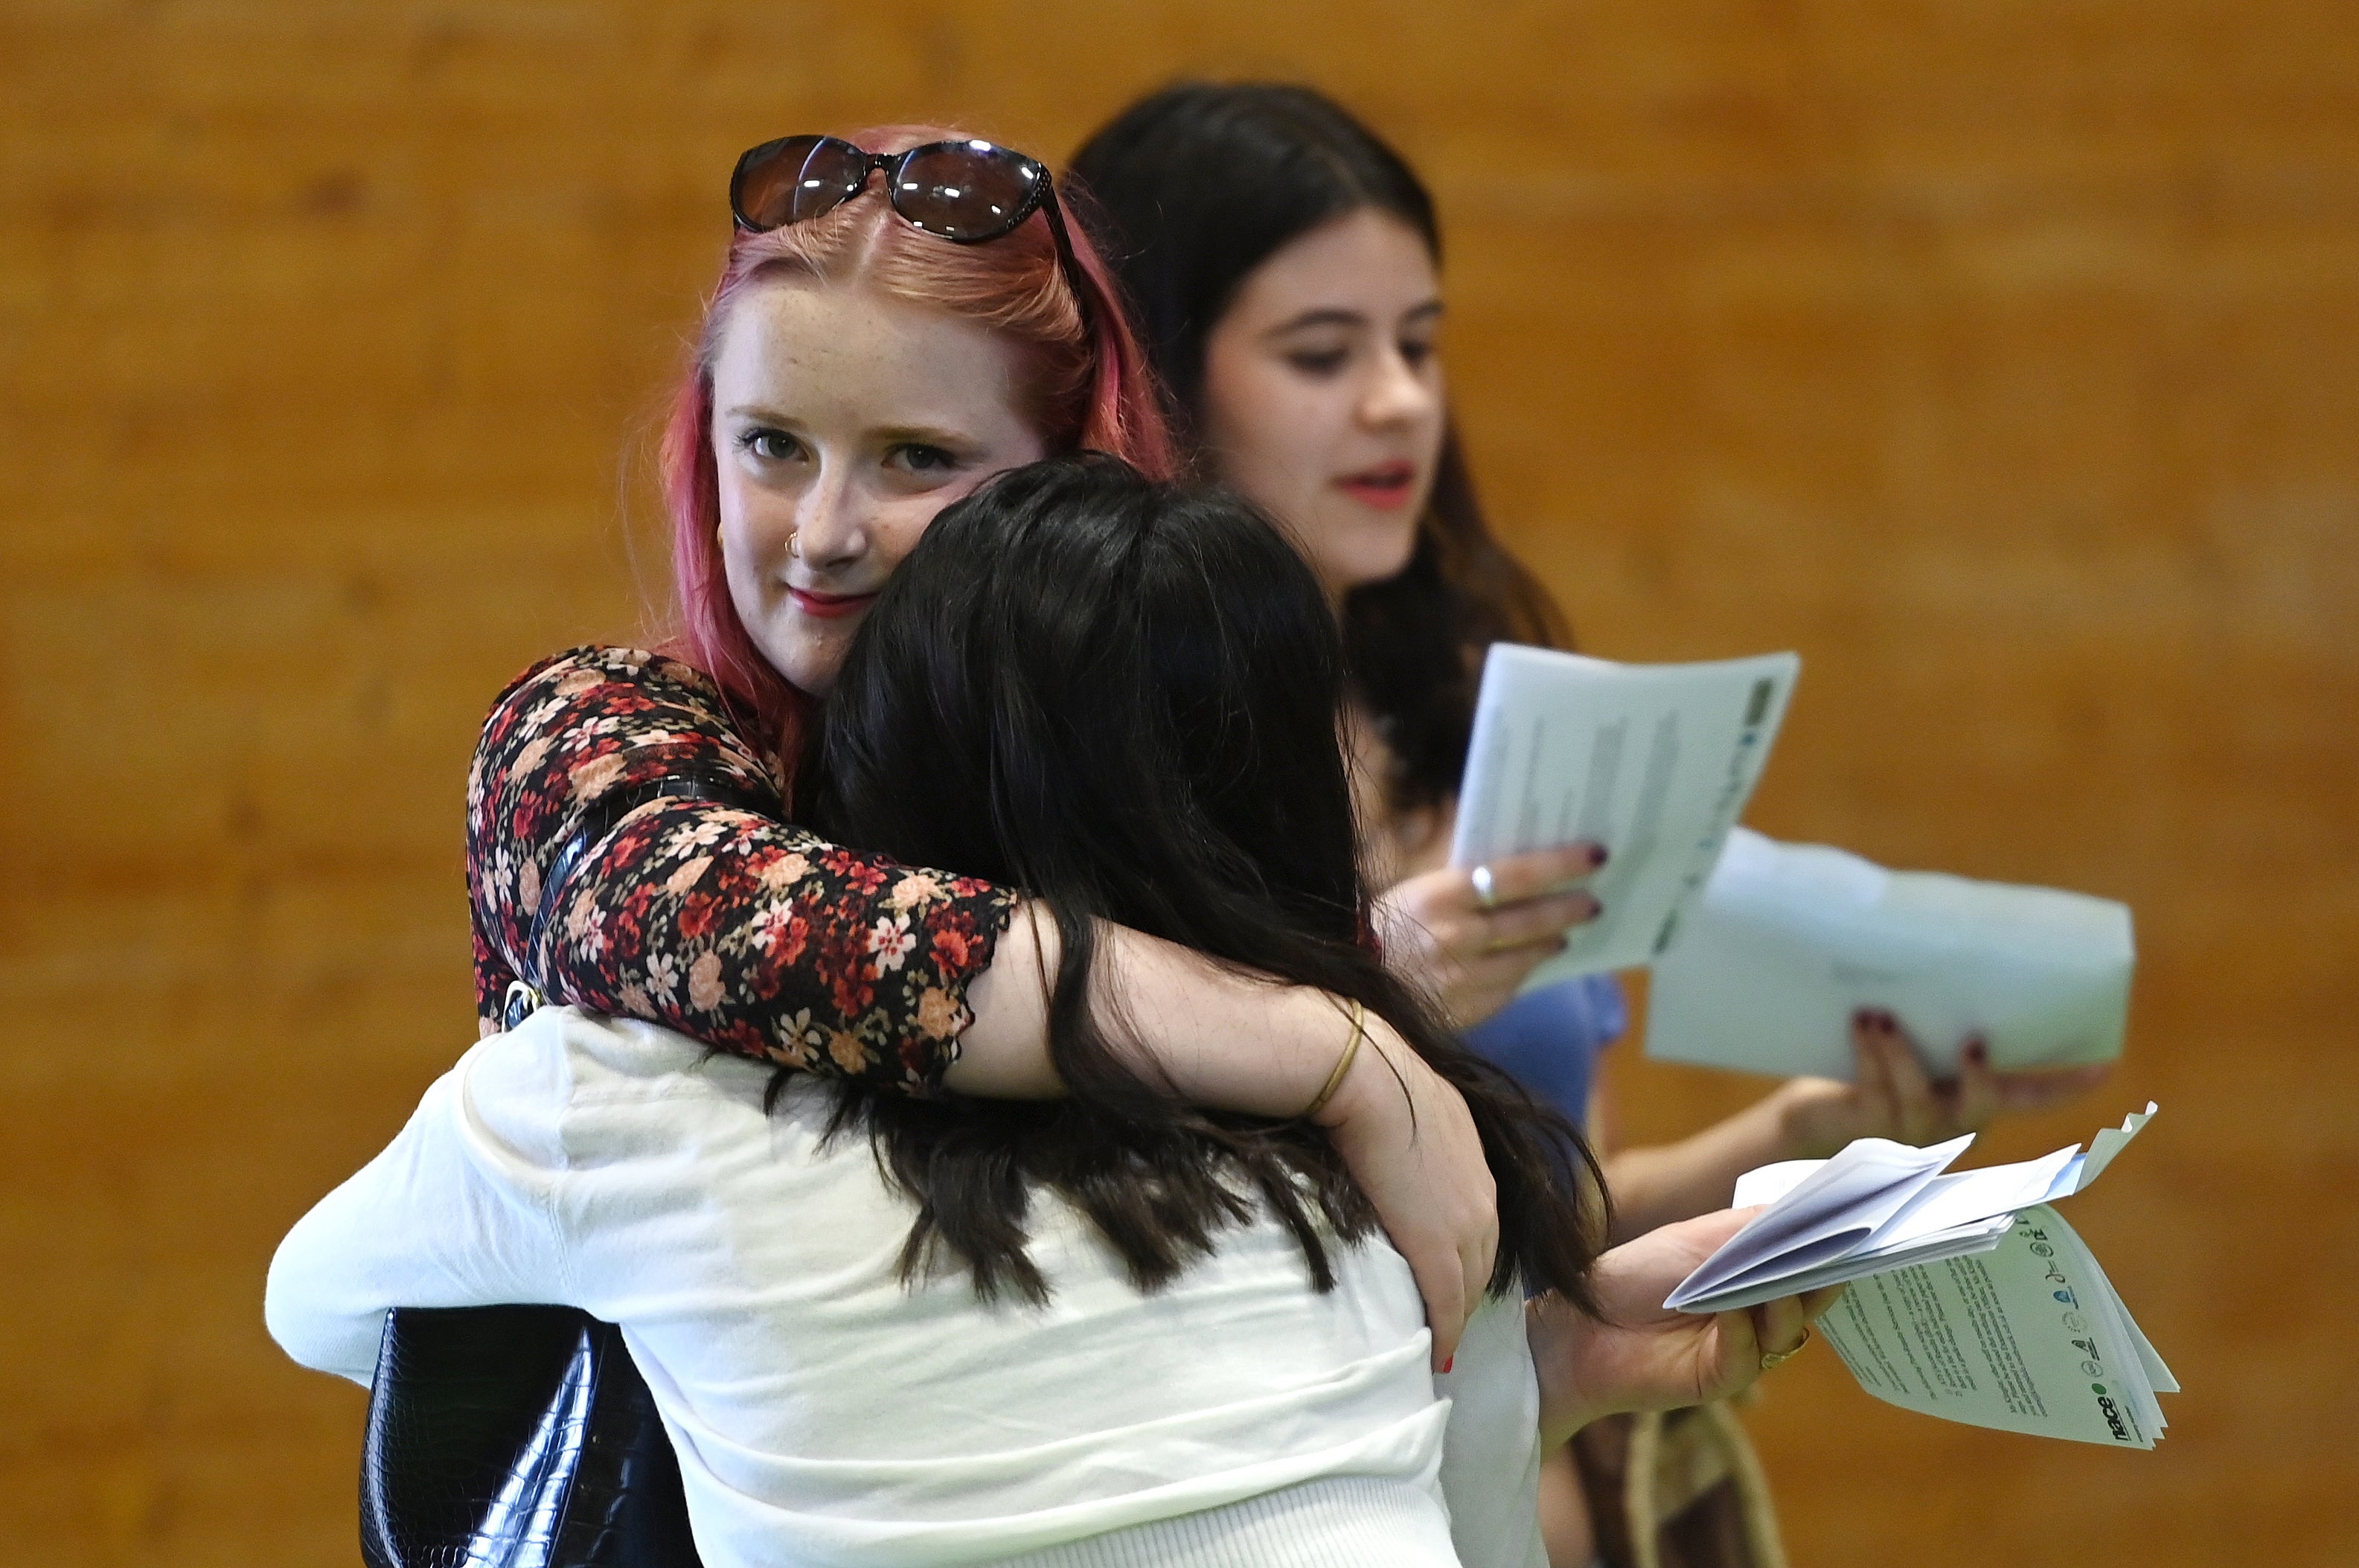 Many thousands of A-level students opened their results on Thursday